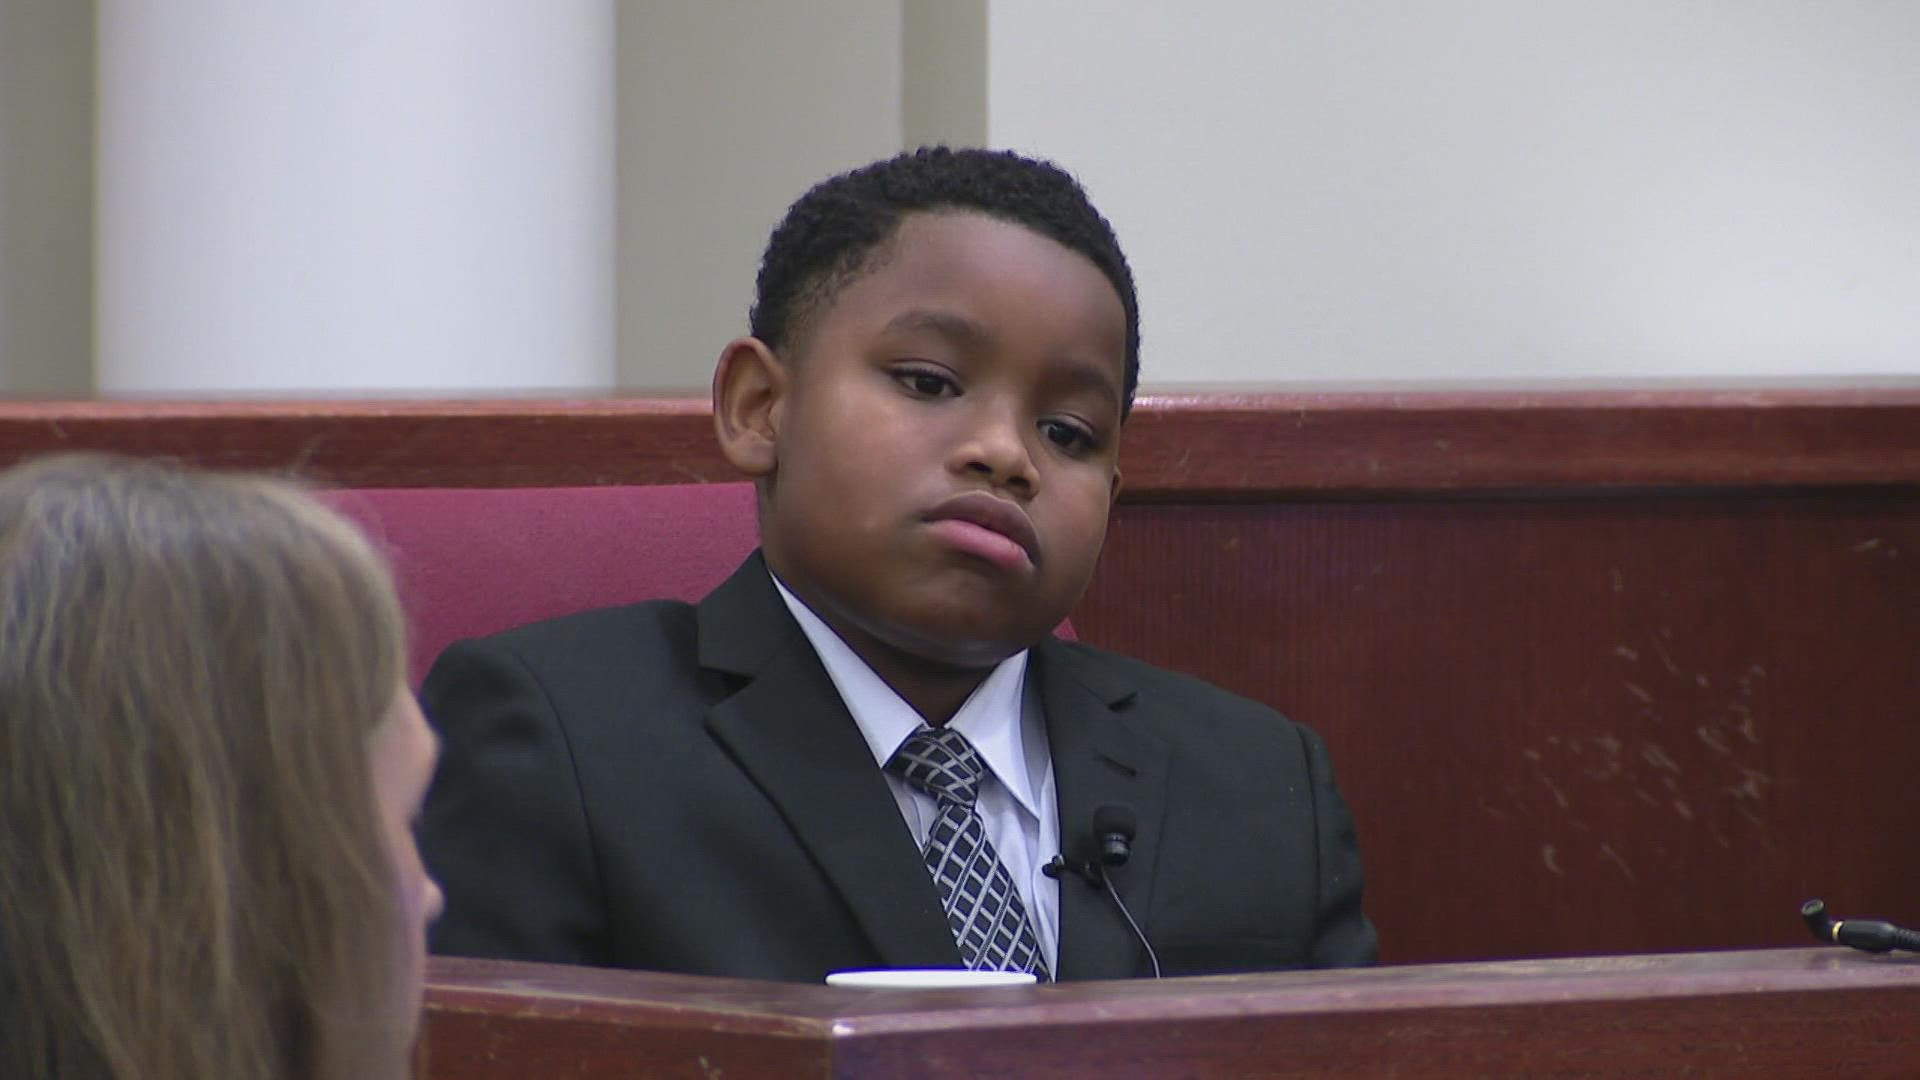 Atatiana Jefferson's nephew, Zion Carr, testified on the first day of Aaron Dean's trial.